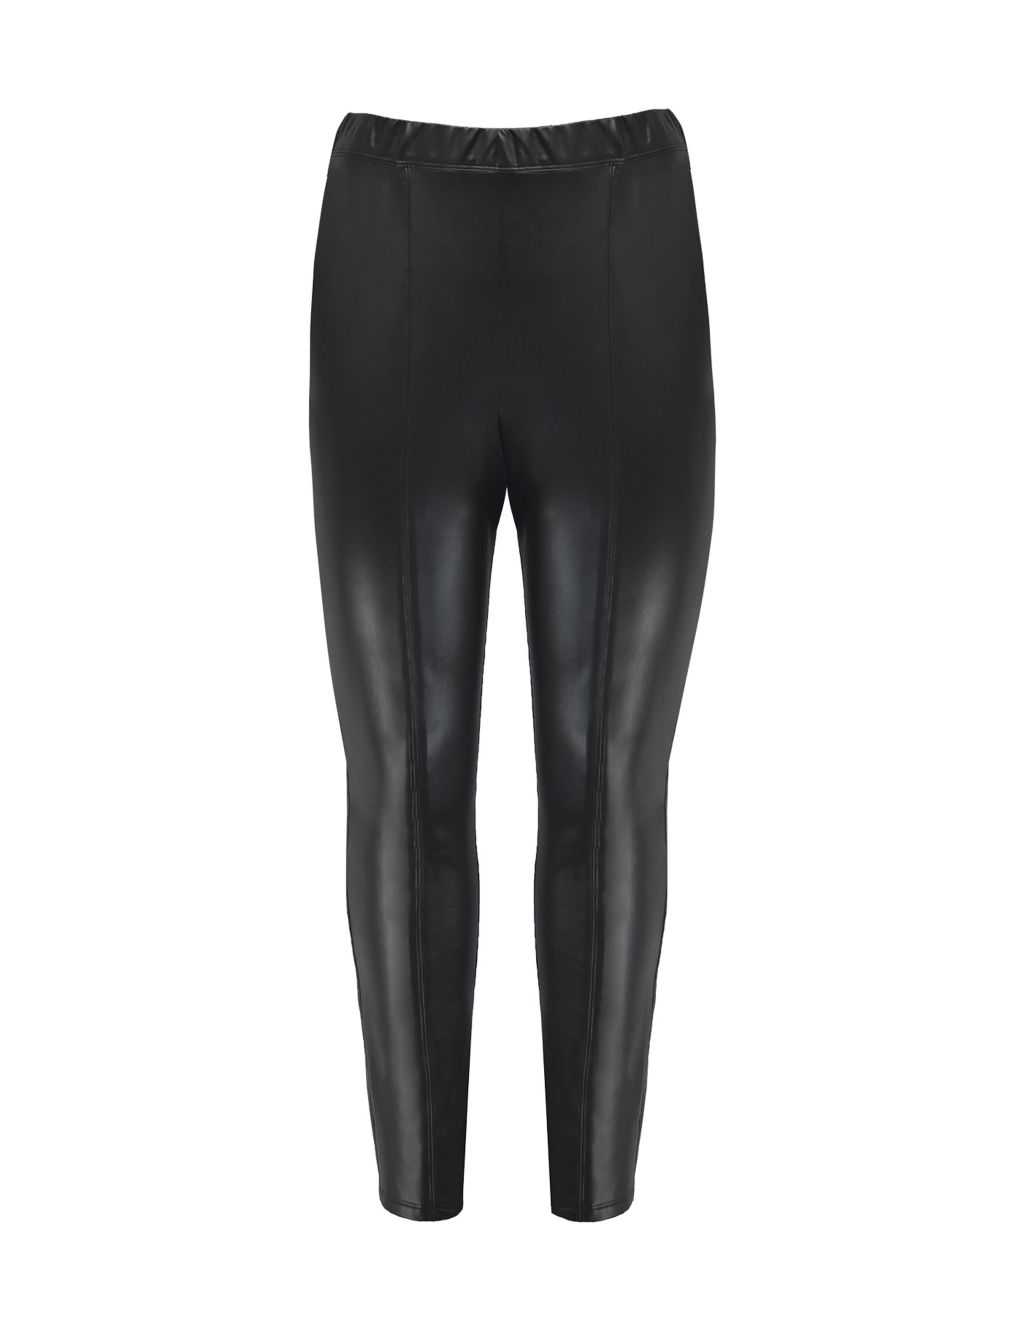 Leather Look Side Zip Straight Leg Trousers image 2